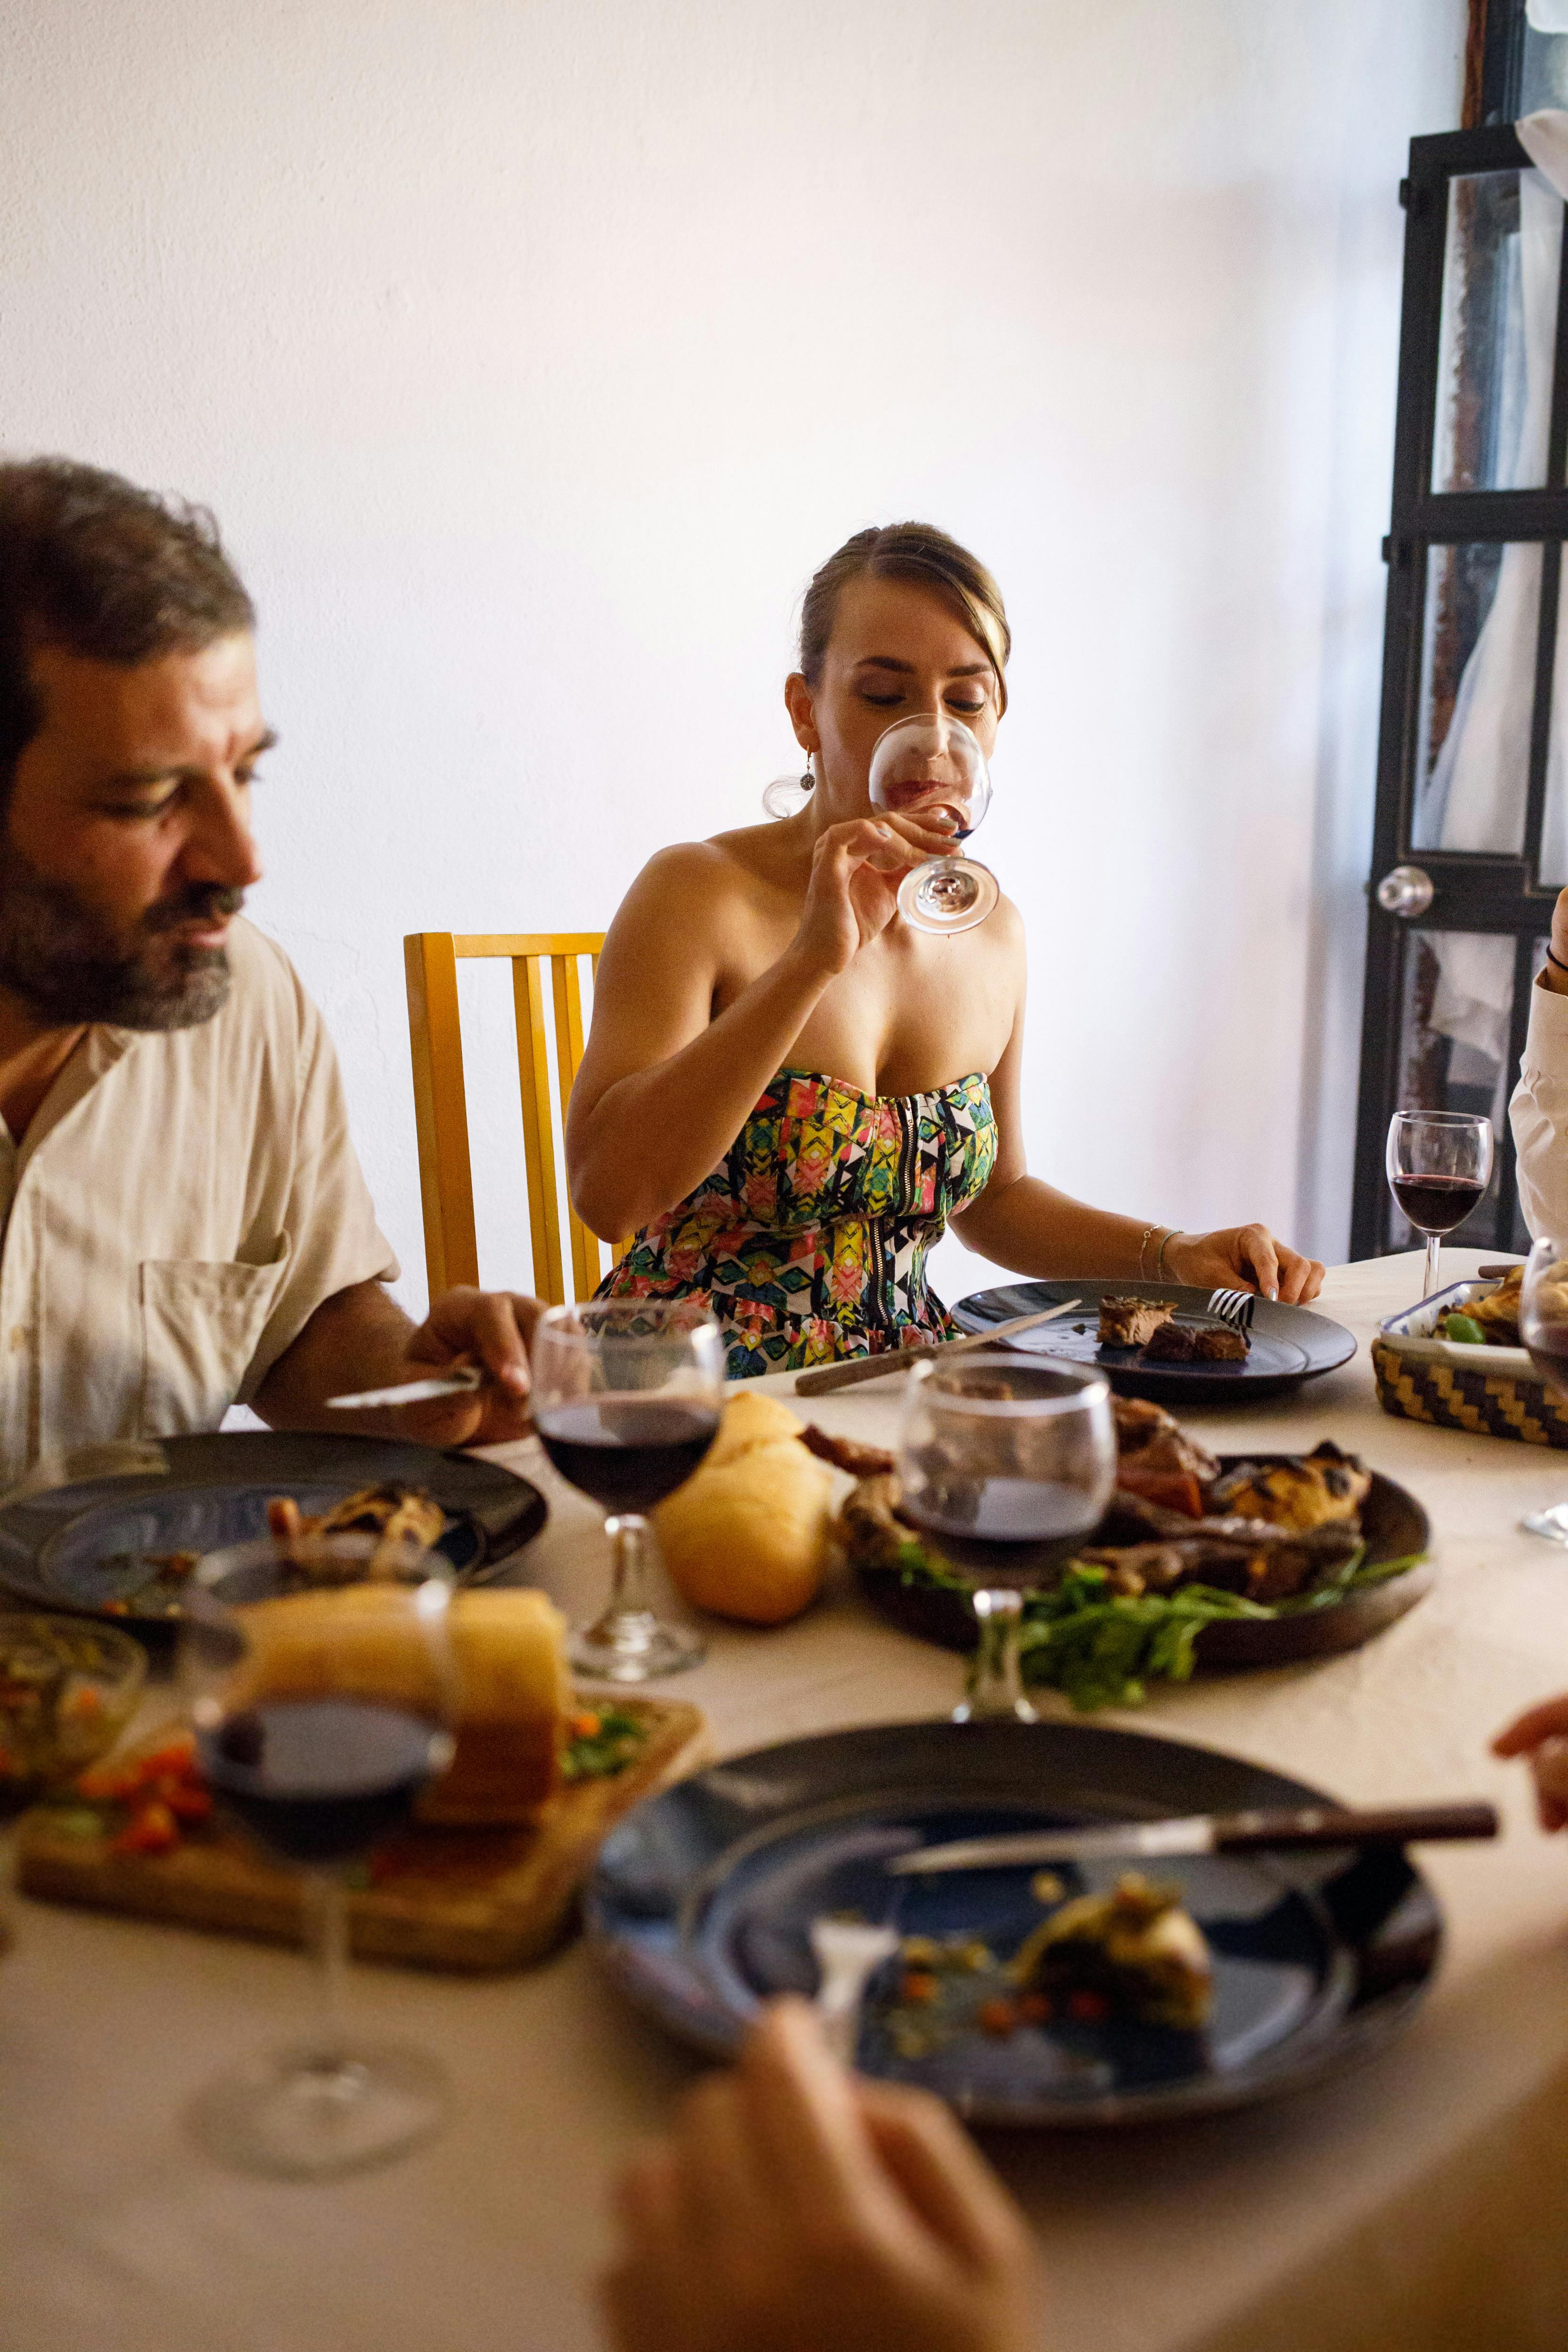 A family enjoying a meal together | Source: Pexels